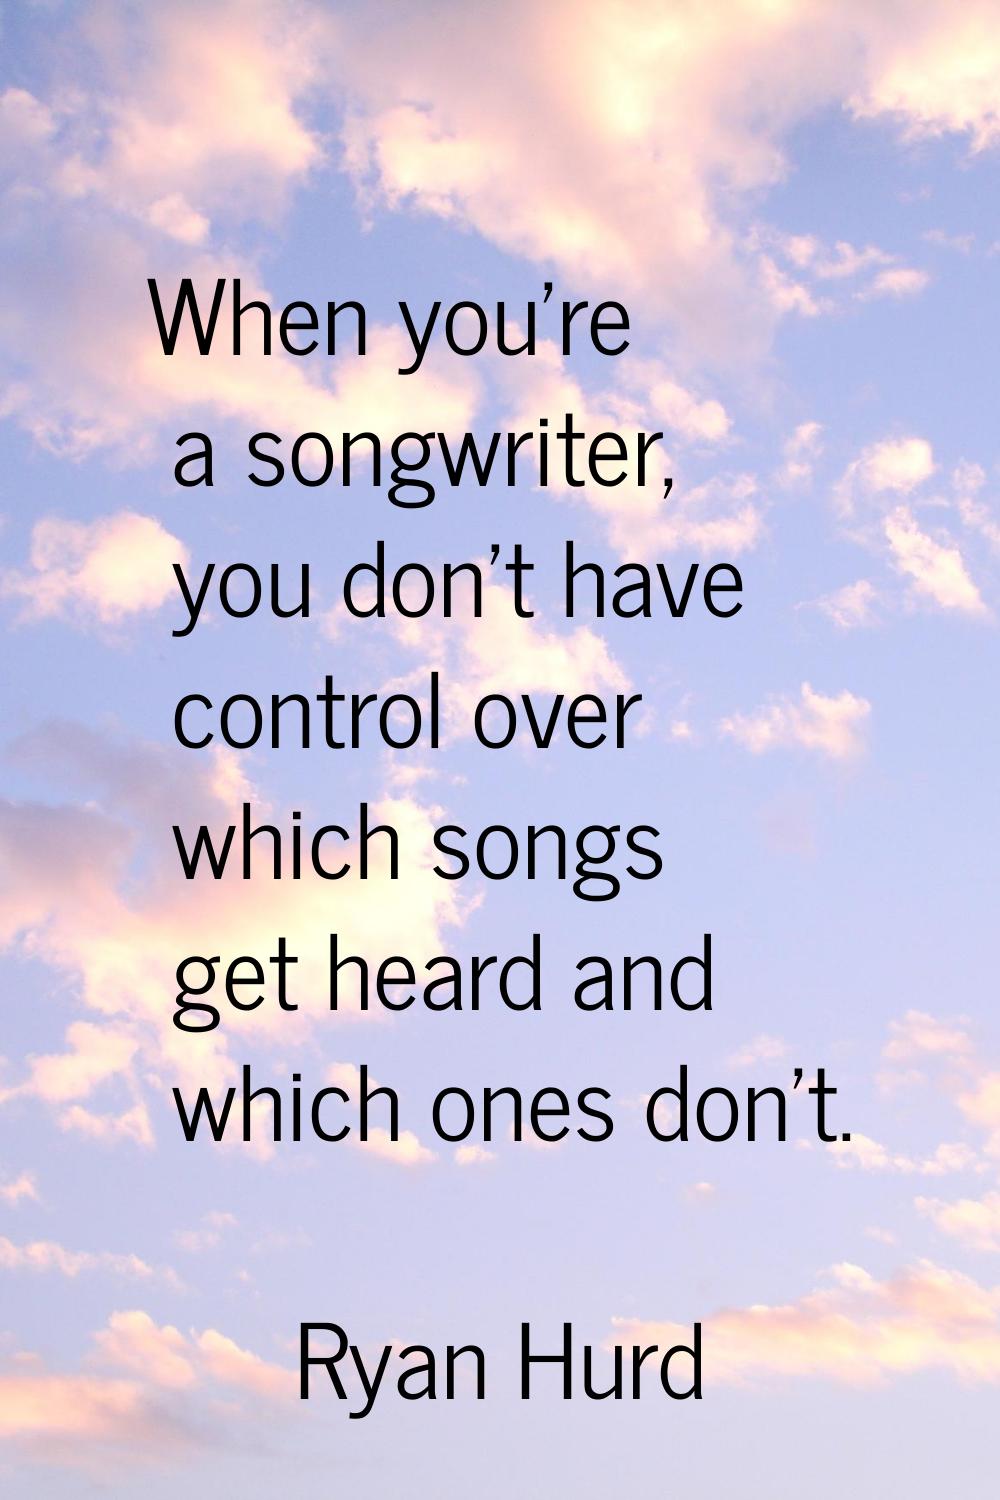 When you're a songwriter, you don't have control over which songs get heard and which ones don't.